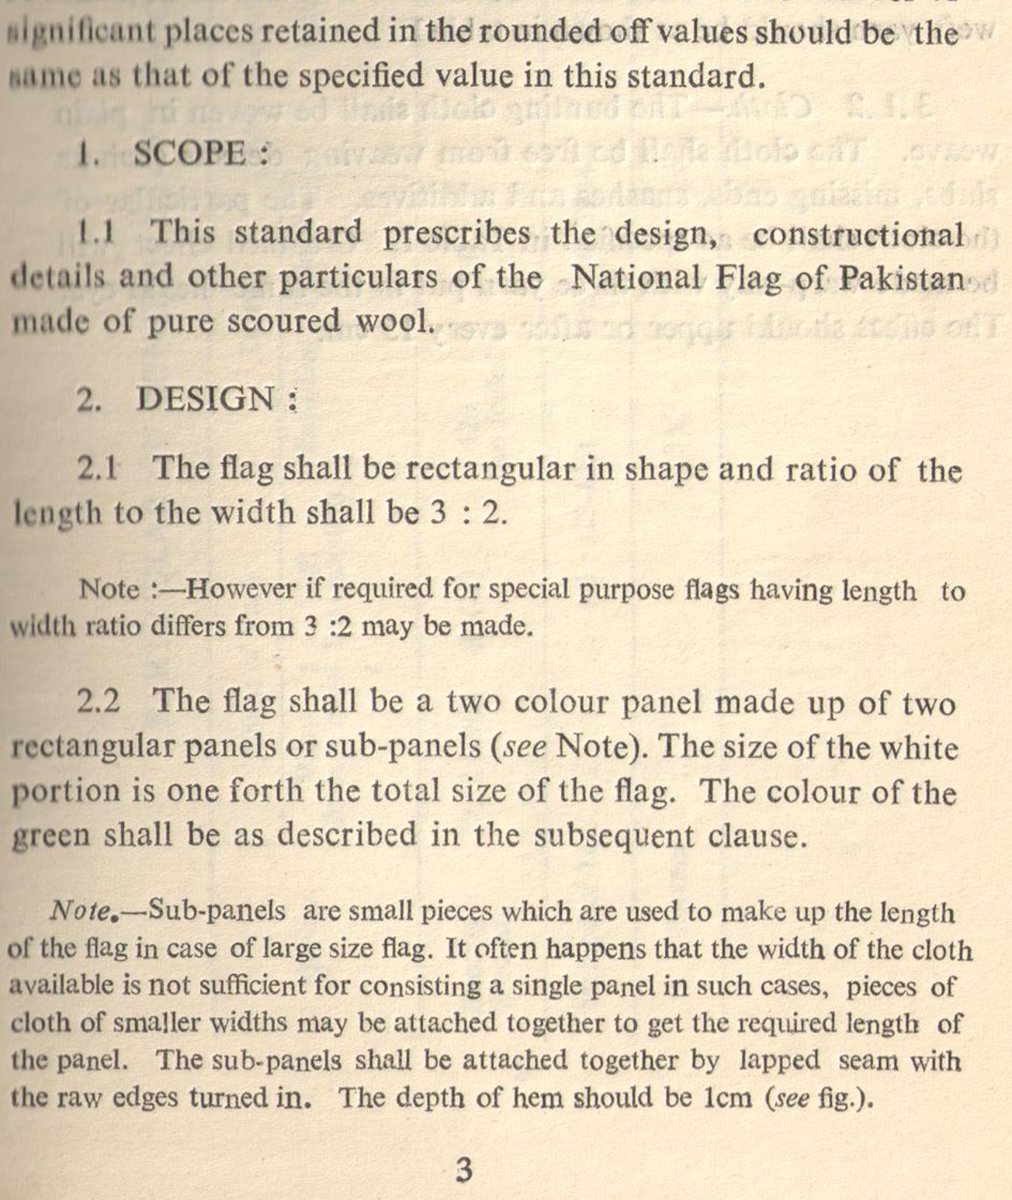 The official document published by the PSQCA in 1985, took responsibility of creating the flag & other government specific emblems. The document records fine details on the visual blueprint, material, dimensions, as well as testing method to ensure quality before distribution.